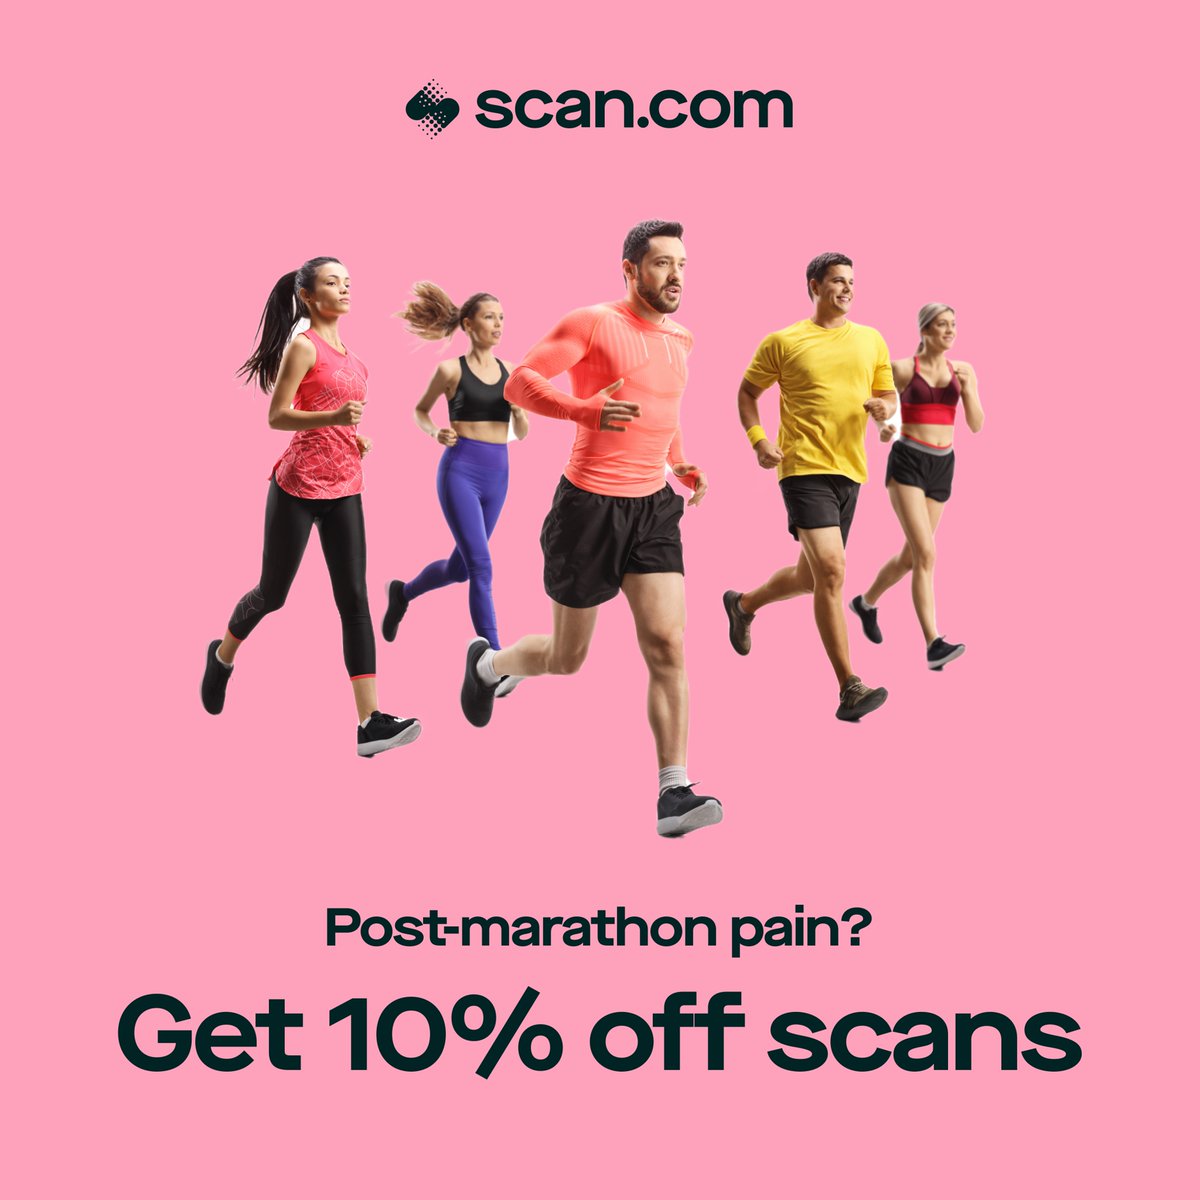 🏃‍♀️Feeling the aftermath of the London Marathon? 🏃‍♂️ Don’t let a niggling knee, a hurting hip, or an aching ankle slow you down. Get a scan to find out what's causing your pain, and how to recover. Use LDN-MARATHON-SCAN for 10% off until 12th May at Scan.com.